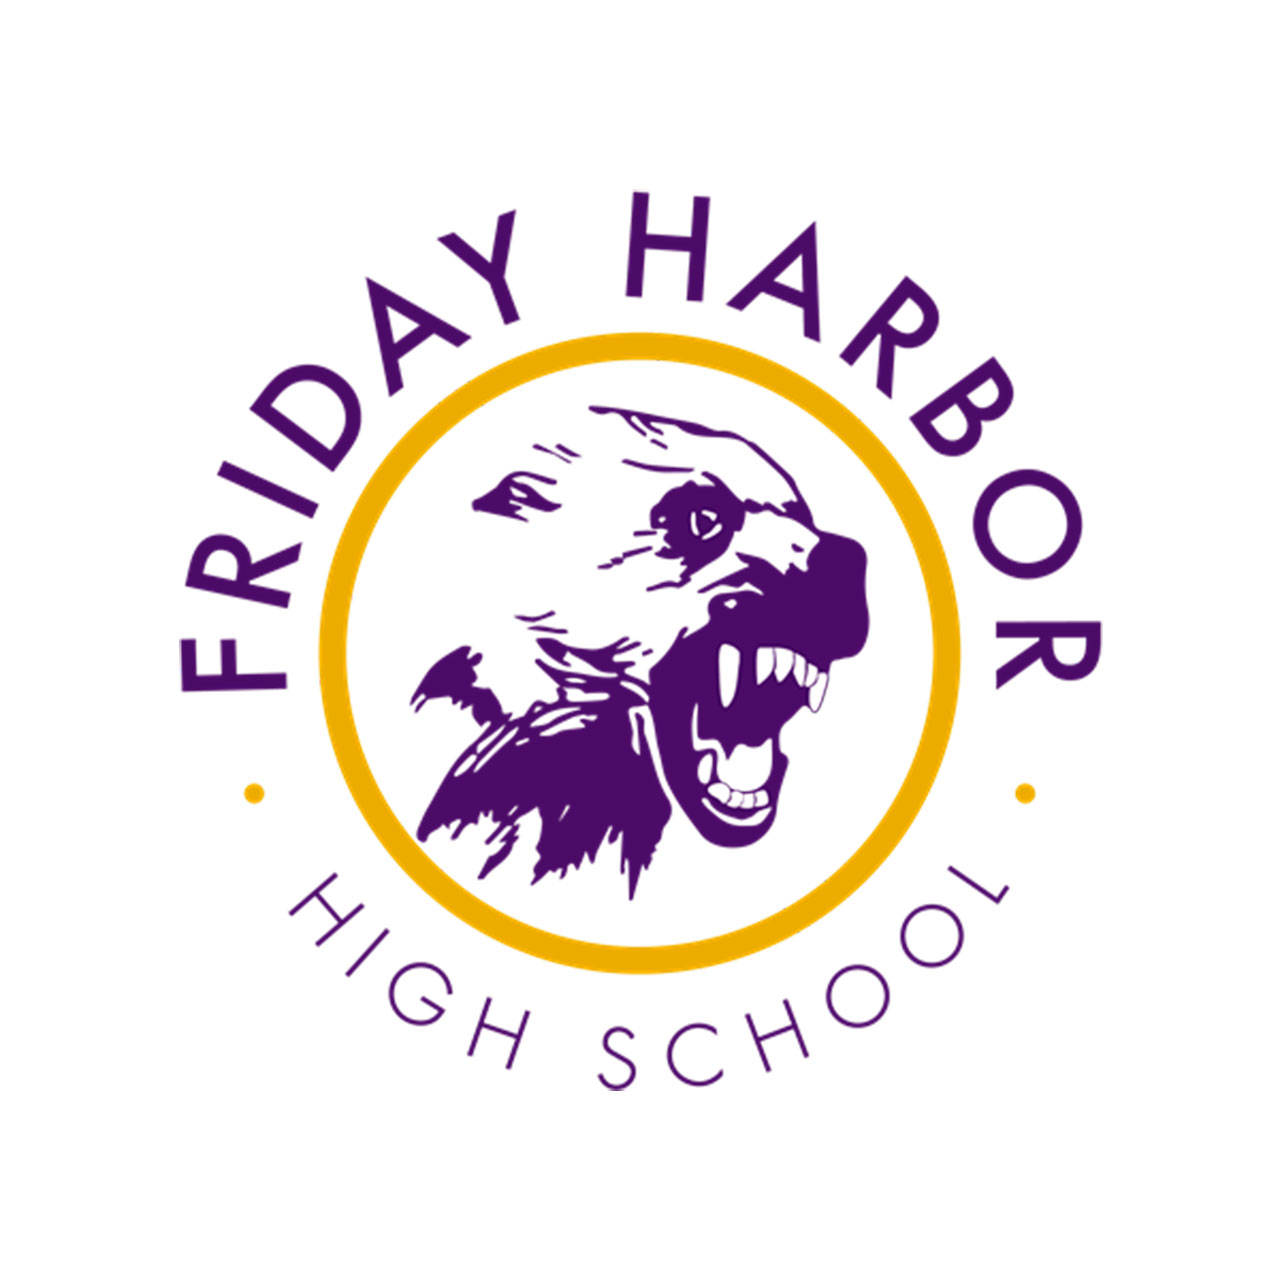 Evaluate students’ community service projects at Friday Harbor High School